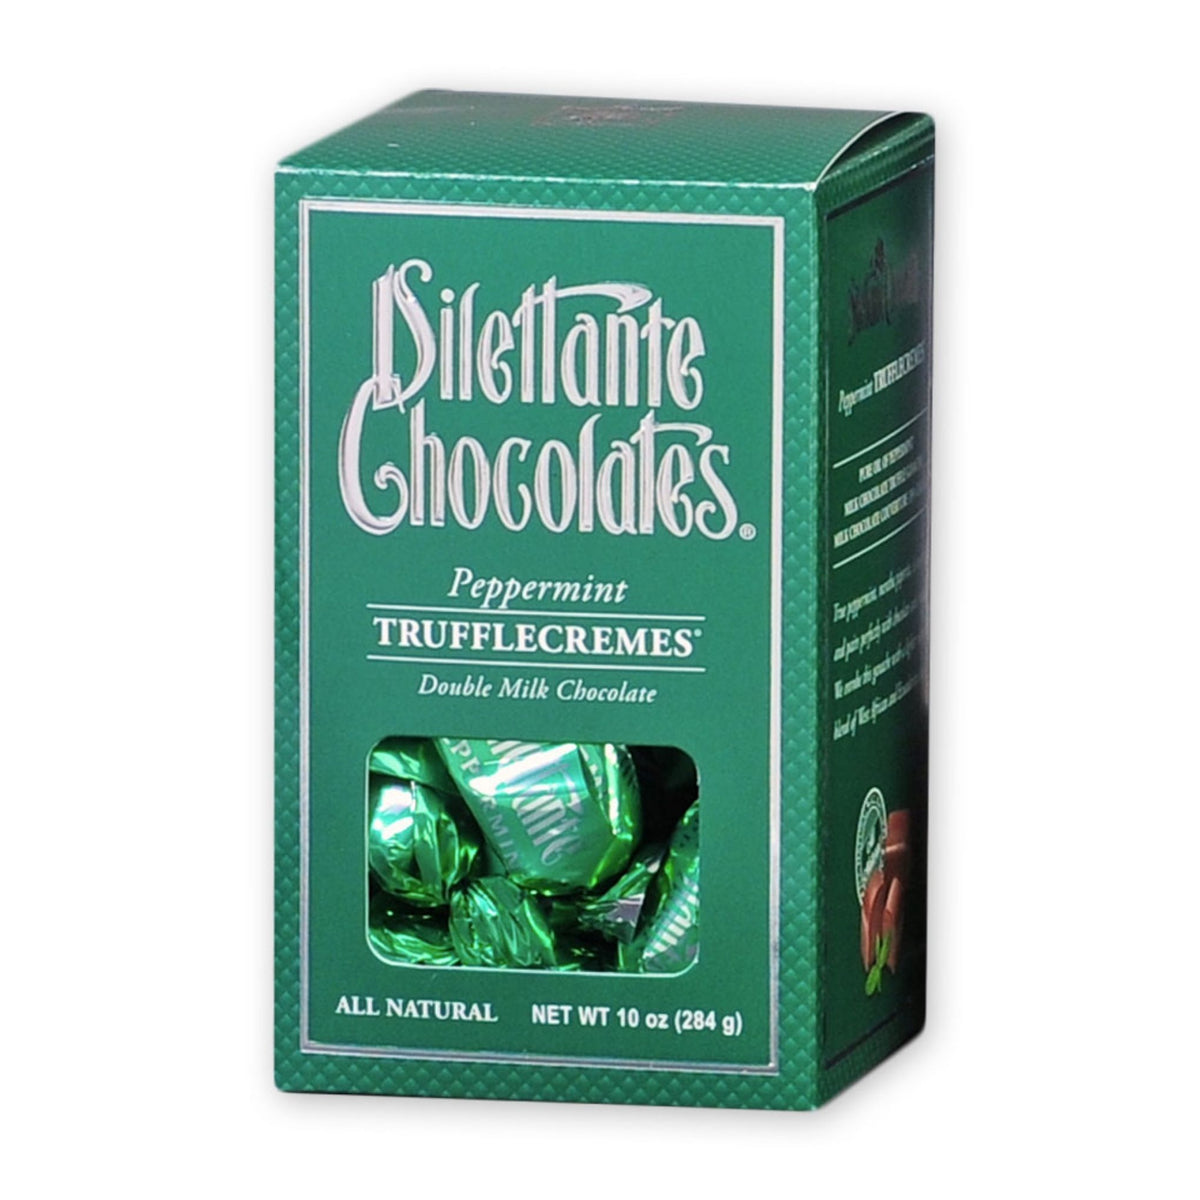 Dilettante Chocolates Peppermint TruffleCremes Coated in Double Milk Chocolate 10-Ounce Gift Box